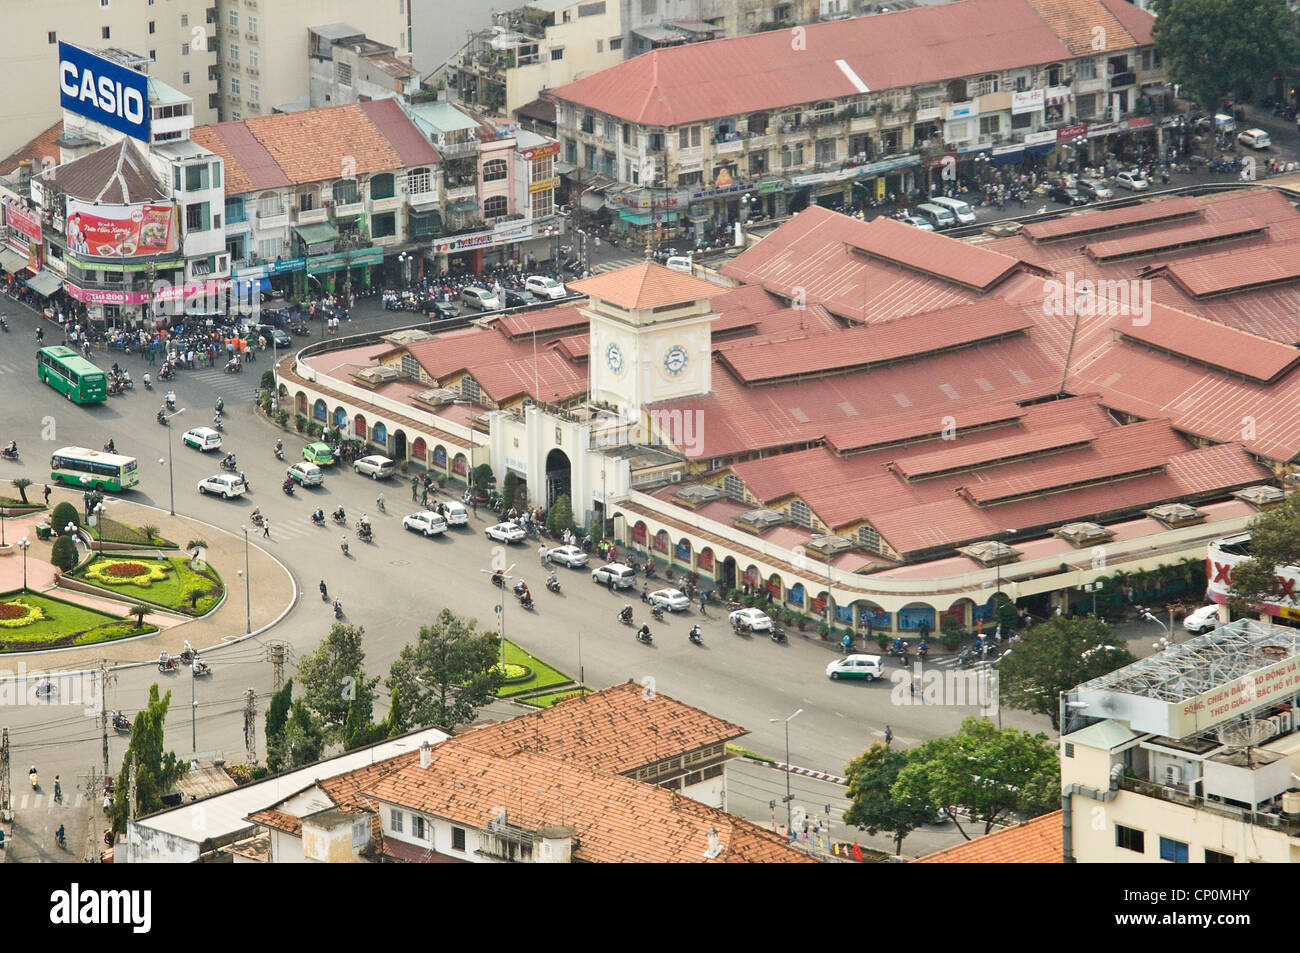 Horizontal aerial view of Ben Thanh market, Chợ Bến Thành, a large marketplace in downtown Ho Chi Minh City. Stock Photo